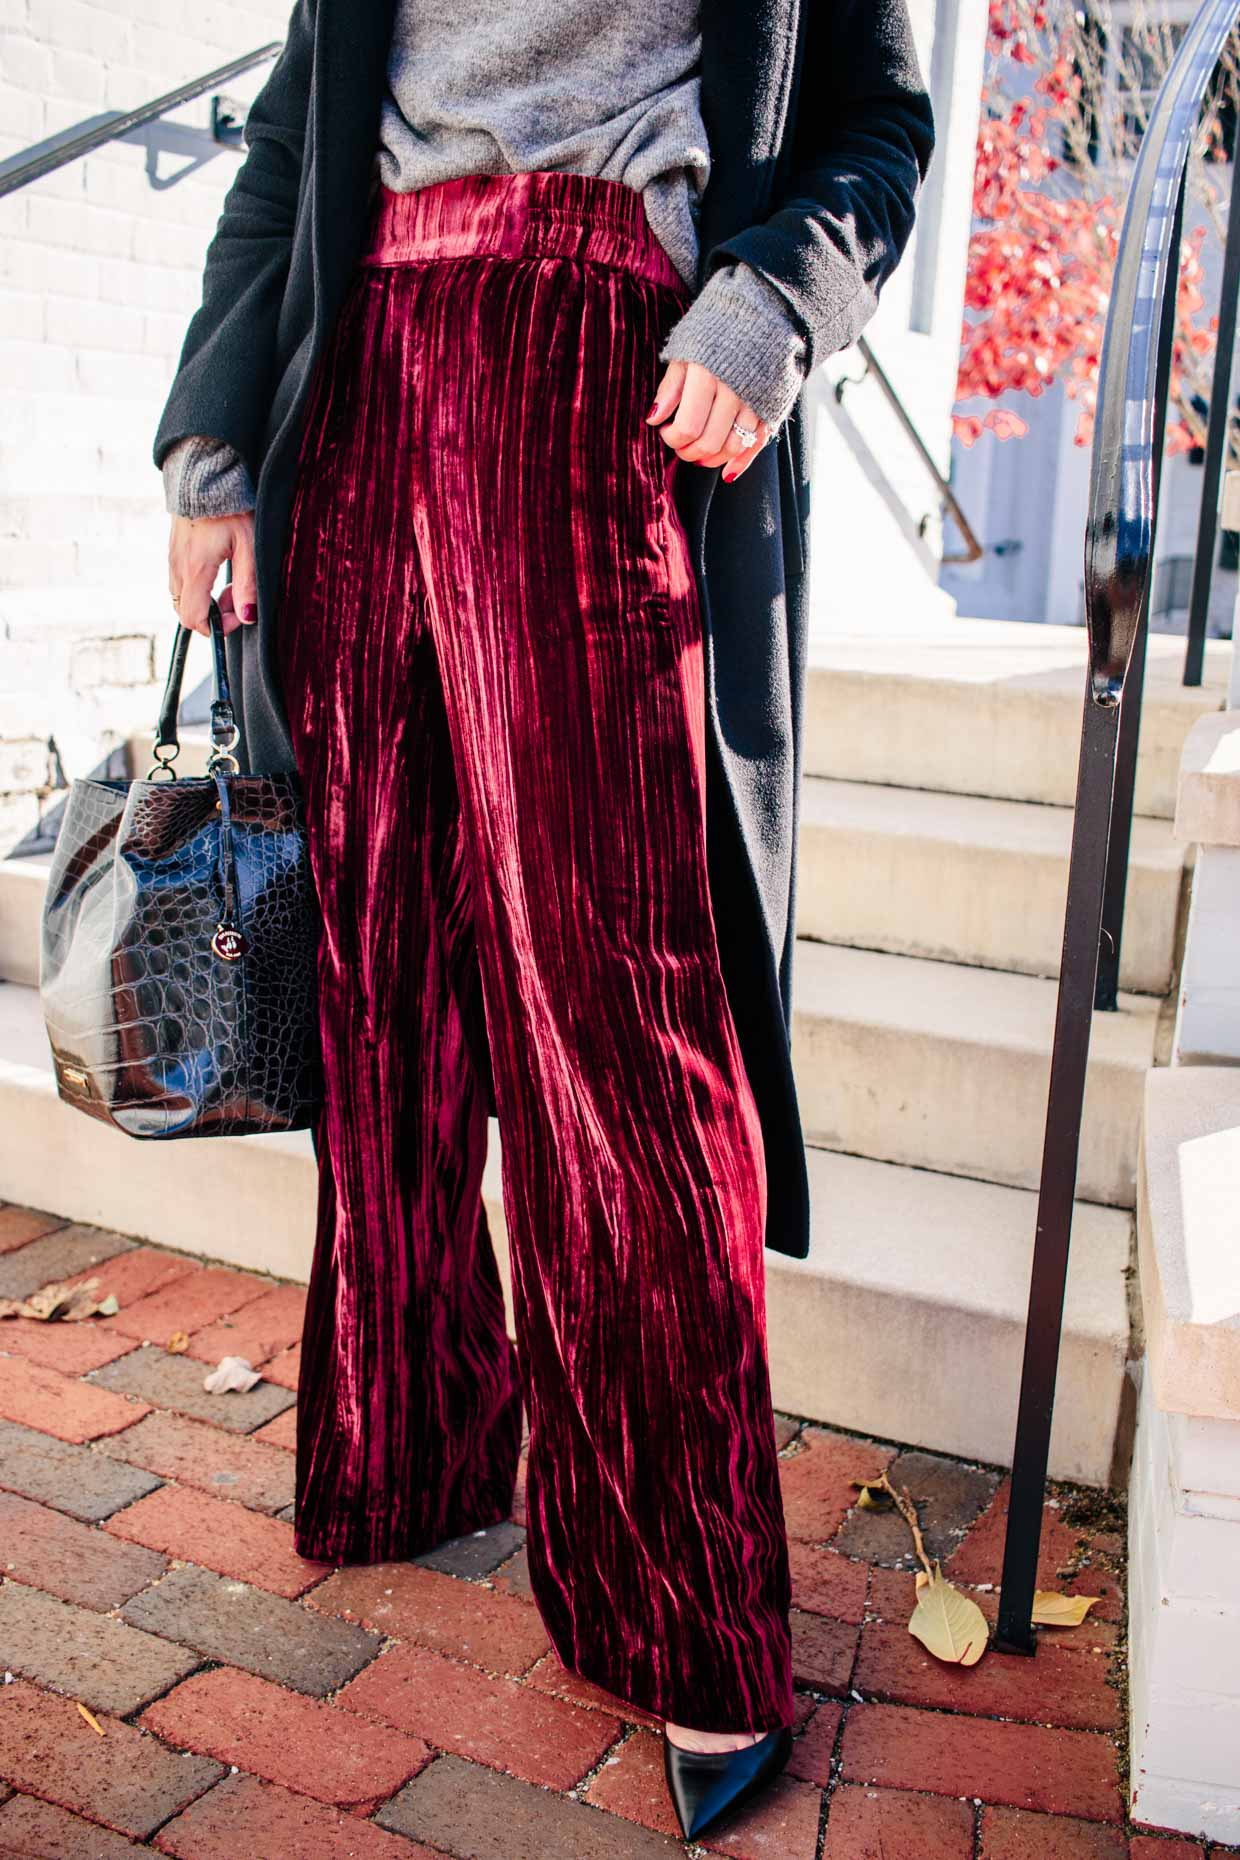 https://www.meagansmoda.com/wp-content/uploads/2019/12/Meagan-Brandon-fashion-blogger-of-Meagans-Moda-shows-how-to-wear-red-velvet-pants-for-the-holidays-with-Valentino-Rockstud-pumps.jpg